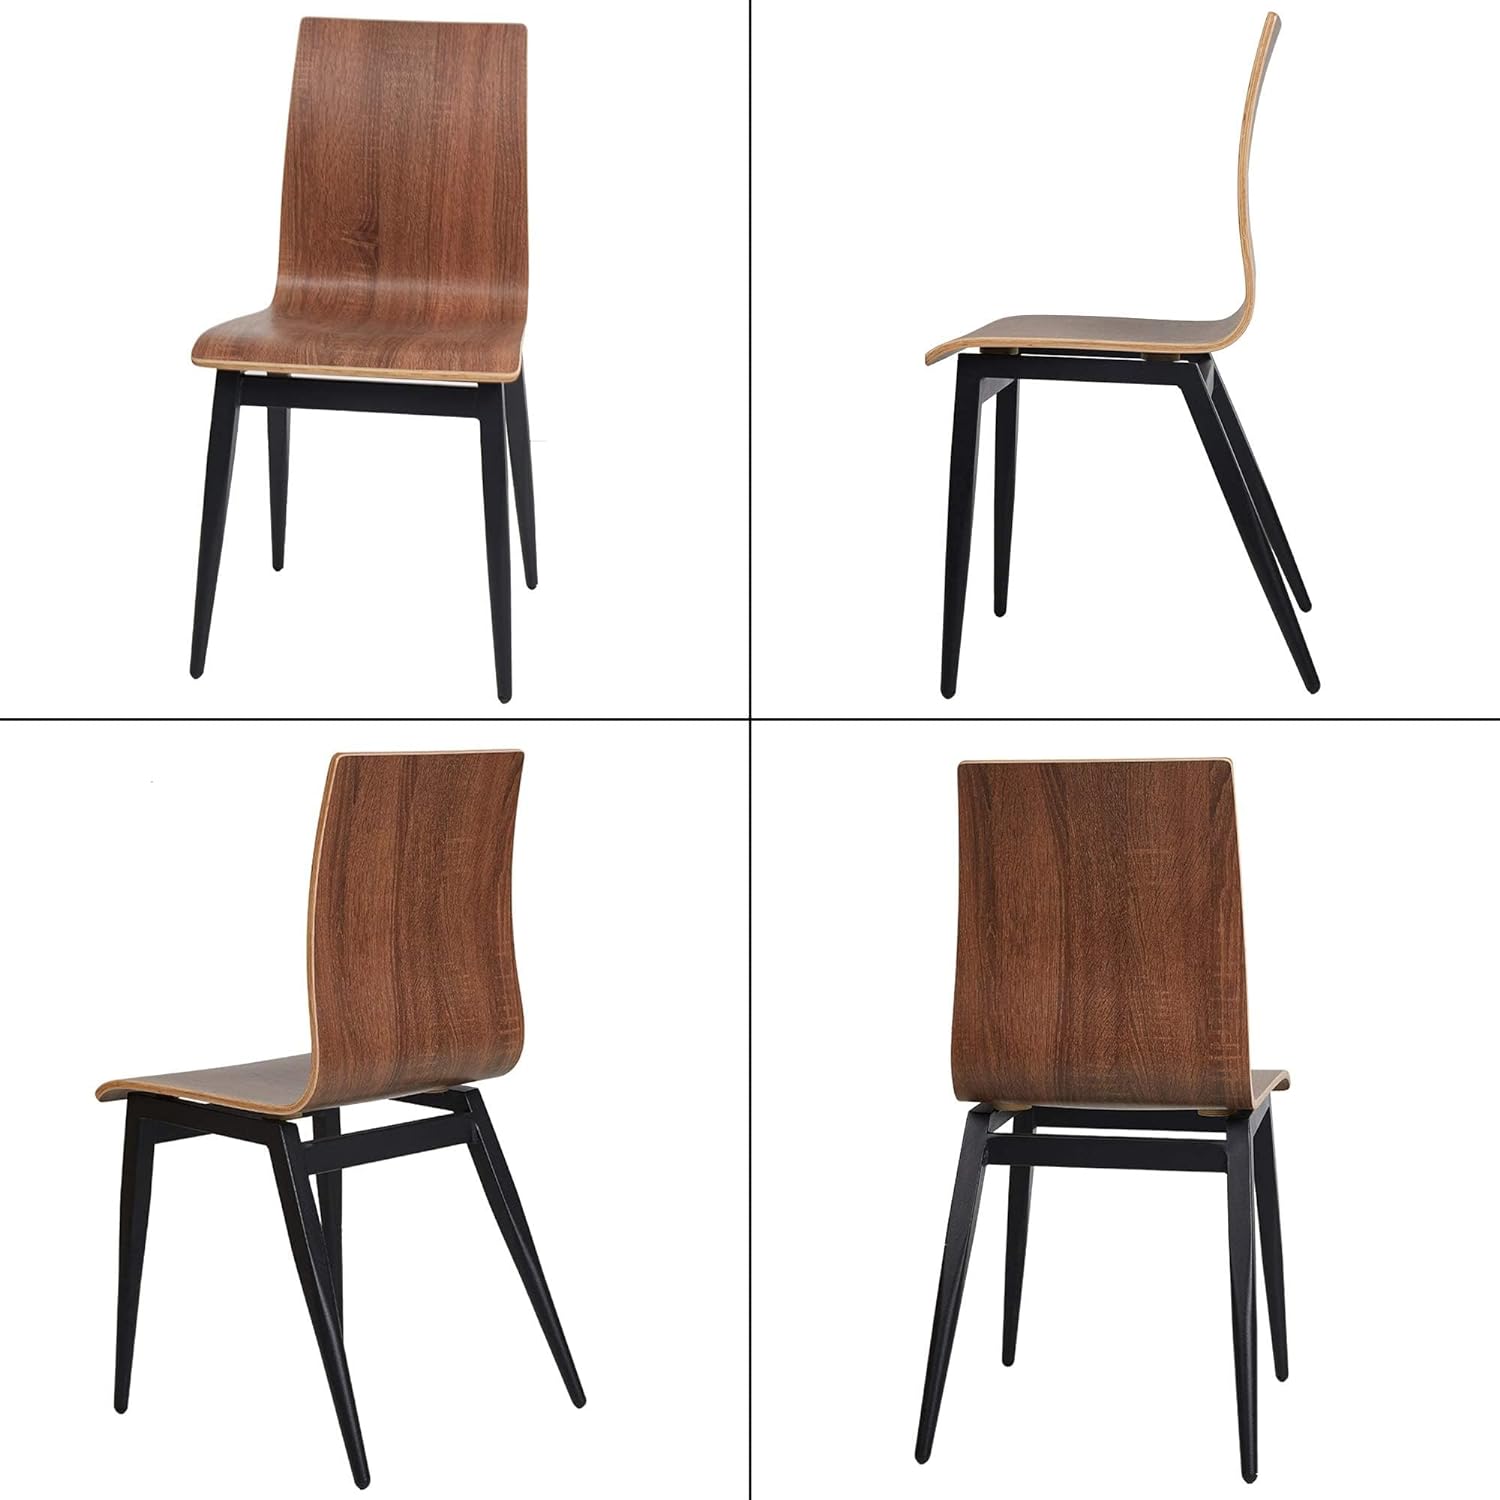 Set of 4 Modern Kitchen Chairs with Wooden Seat and Metal Legs Dining Side Chair, Brown